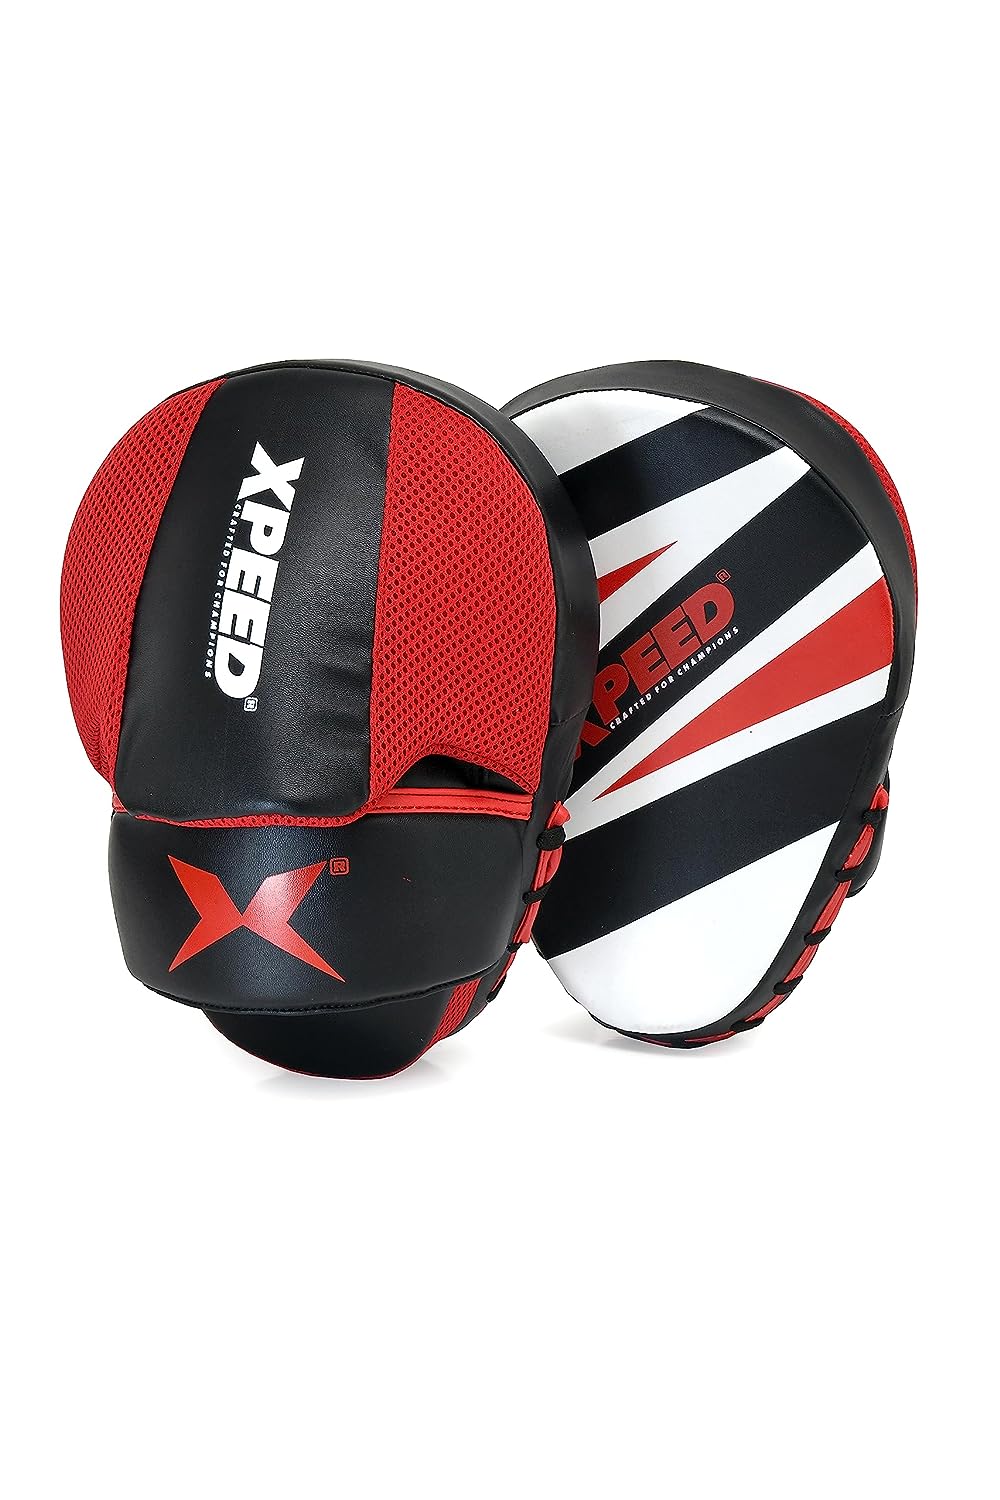 Xpeed Unbeatable PU Curved Focus pad for Boxing|| Kicking || Muay Thai & Martial Arts || Training Punching Focus Target Pads for Men & Women